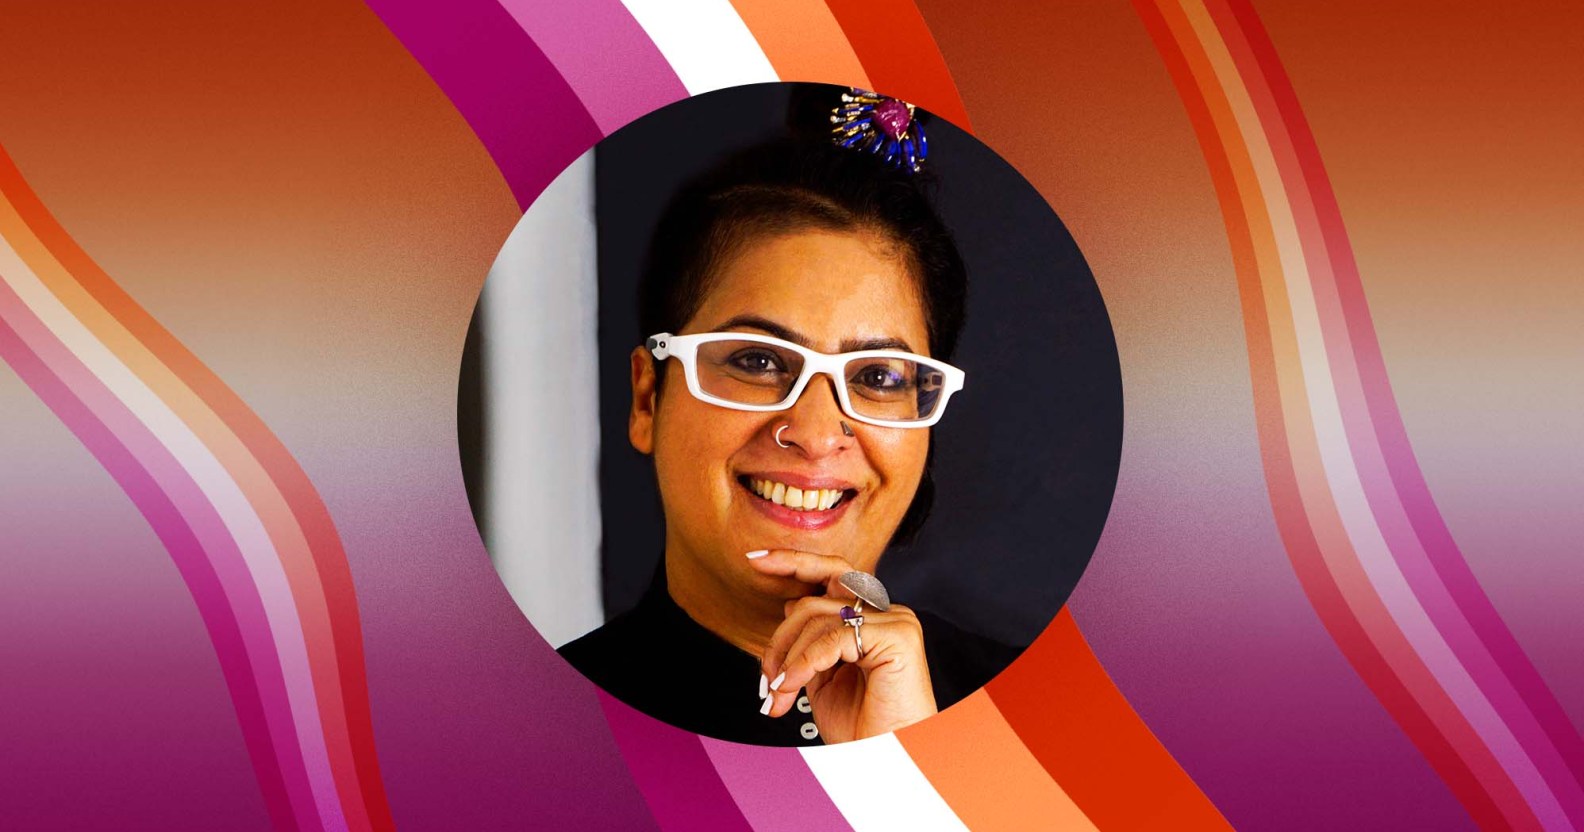 Author and entrepreneur Raga D'silva with lesbian Pride colours pictured behind her.